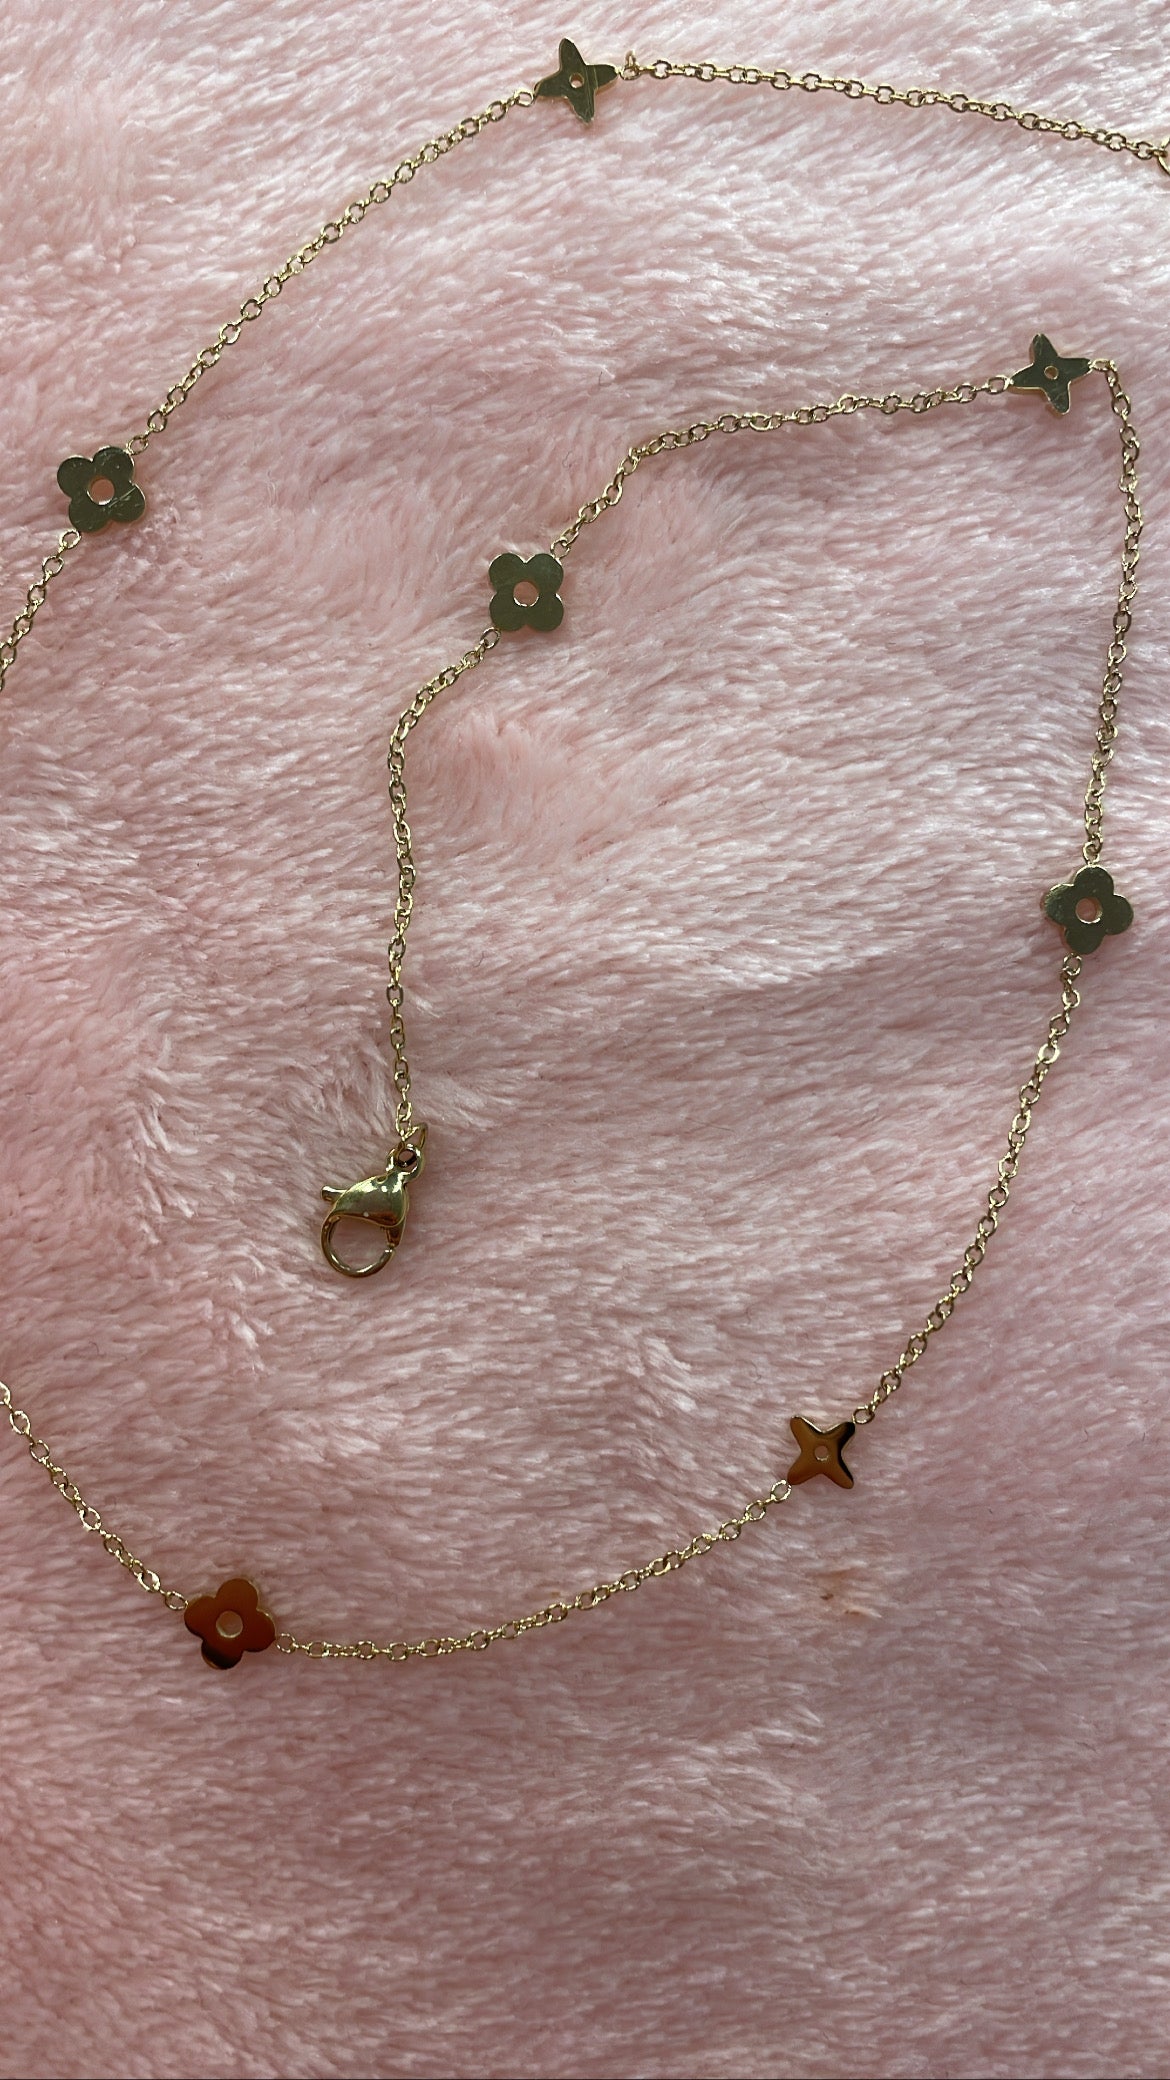 Clover Necklace – BY ARI